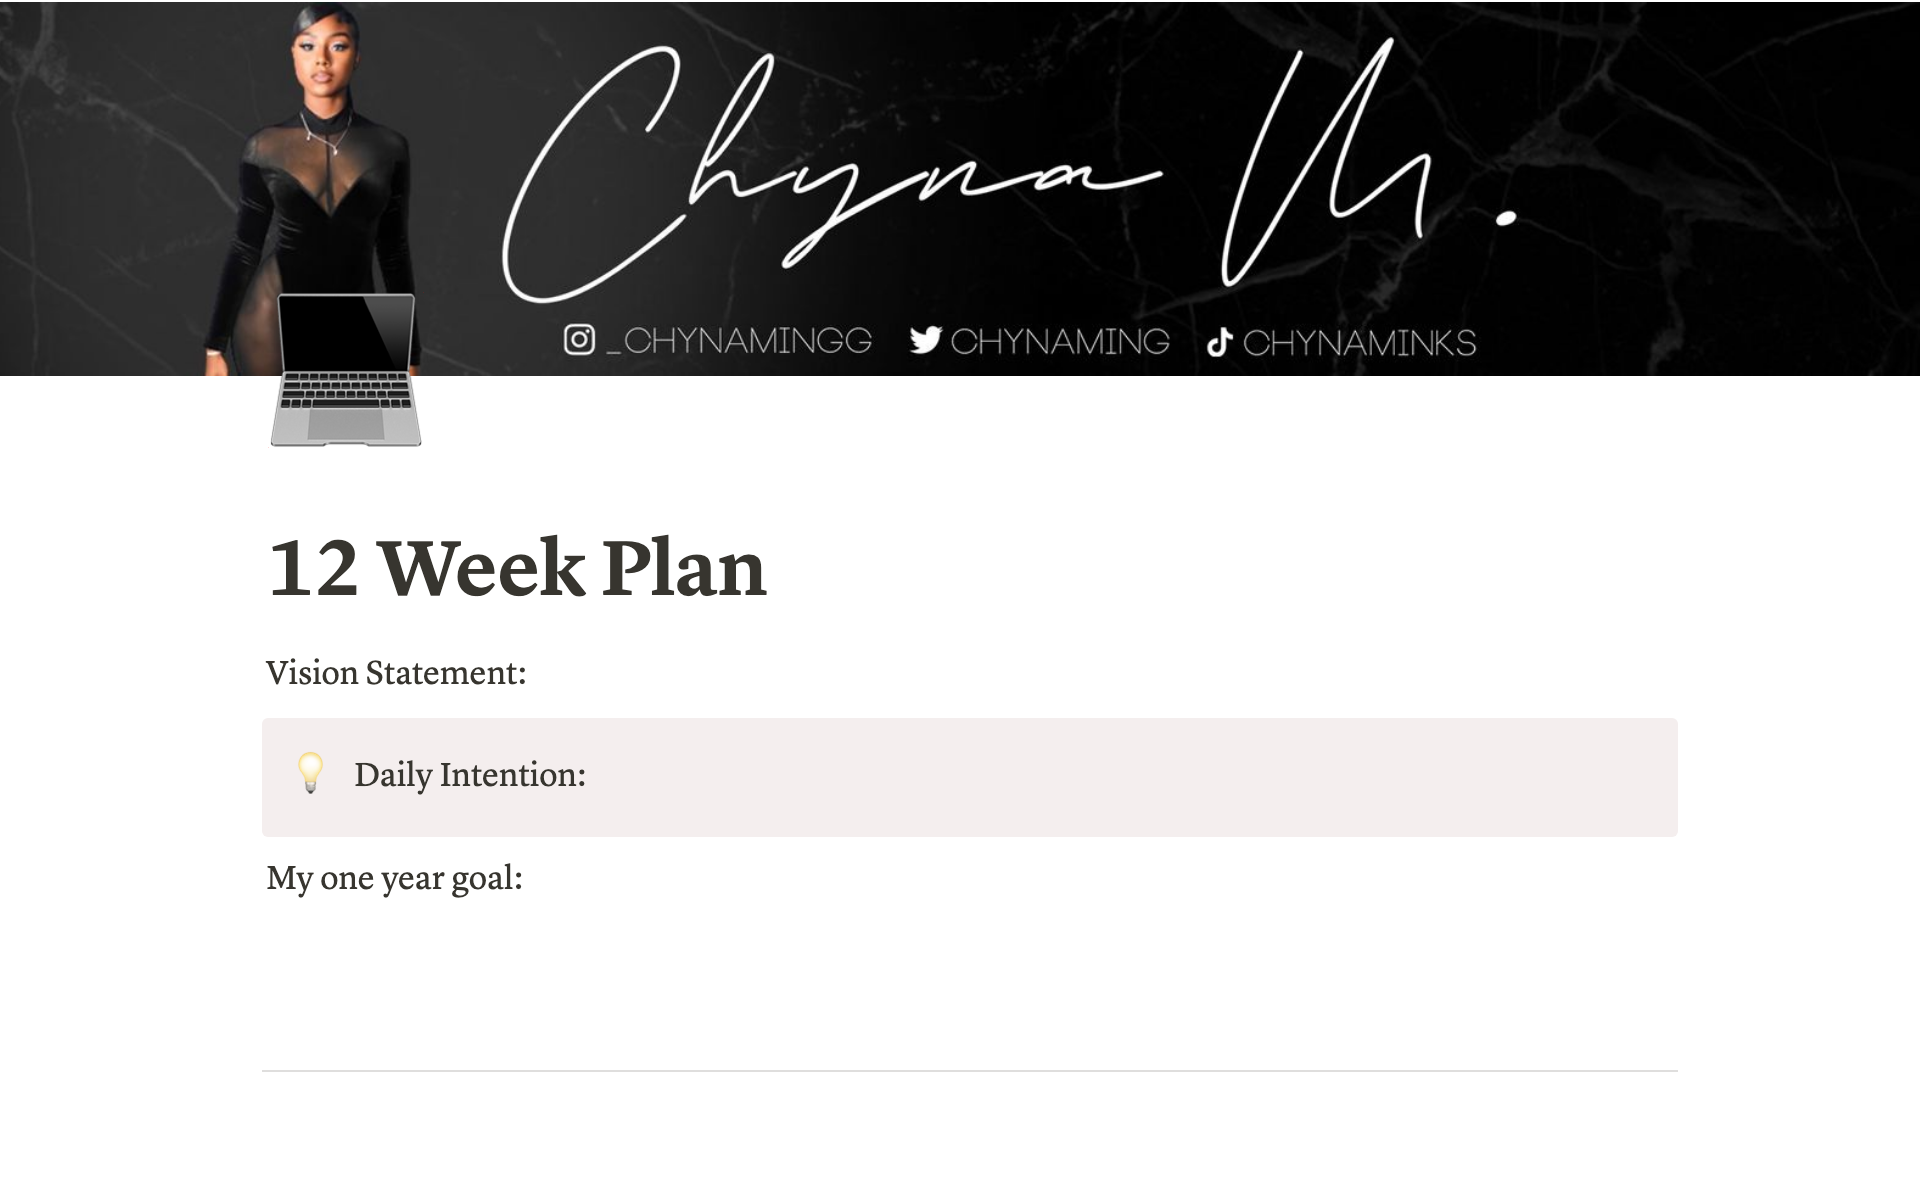 This template helps individuals build and navigate their 12 week plan, especially for the new year.